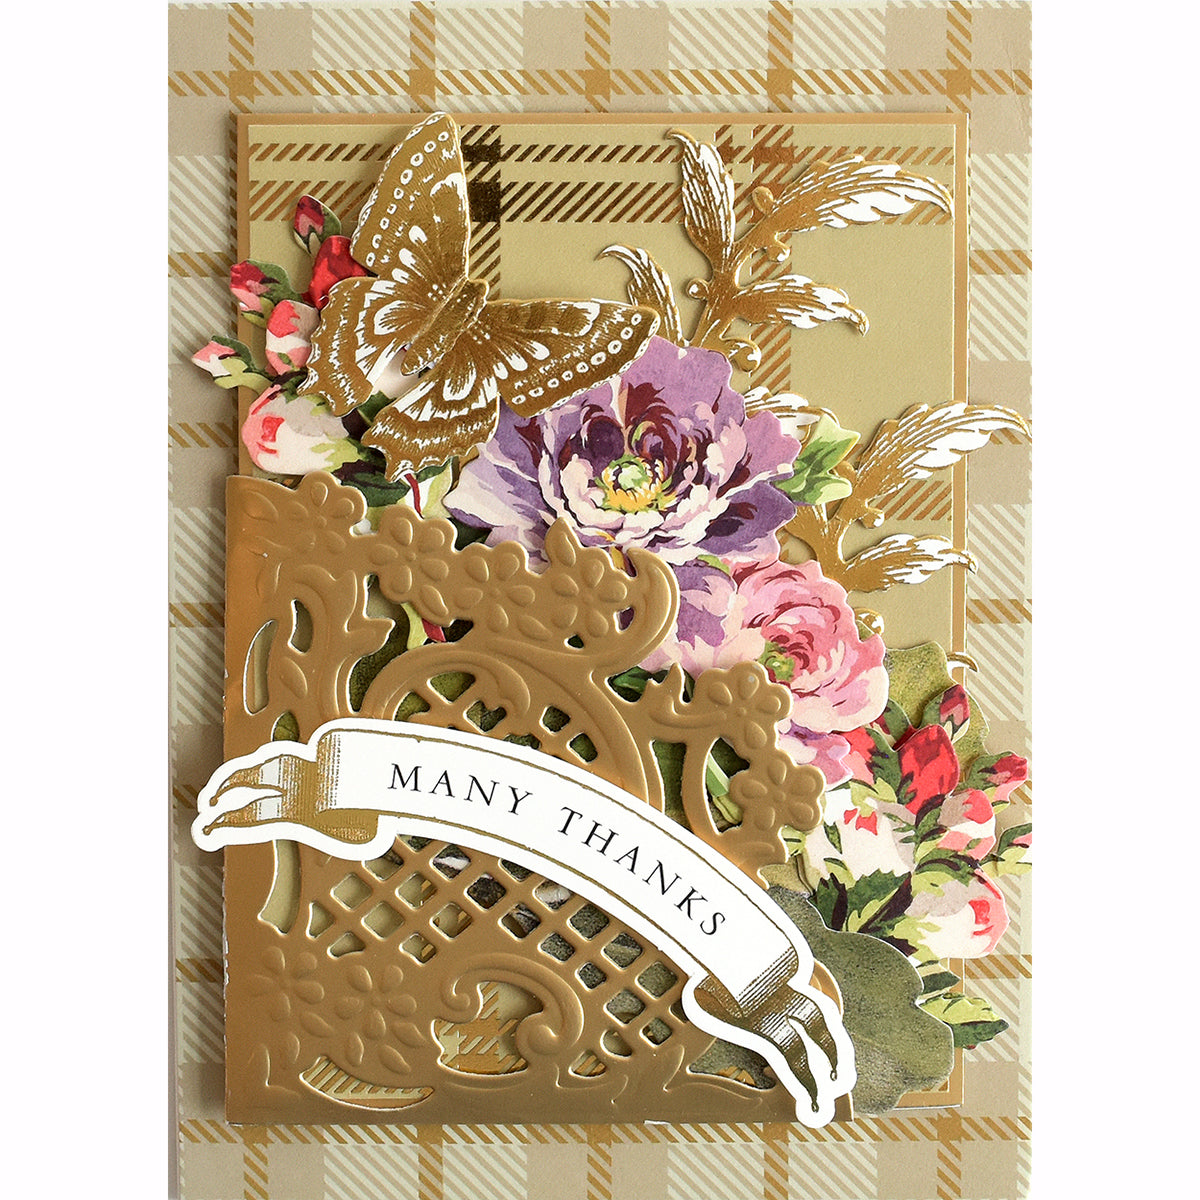 A Fall Plaid Anna Griffin cardstock with flowers and a butterfly made from cardstock.